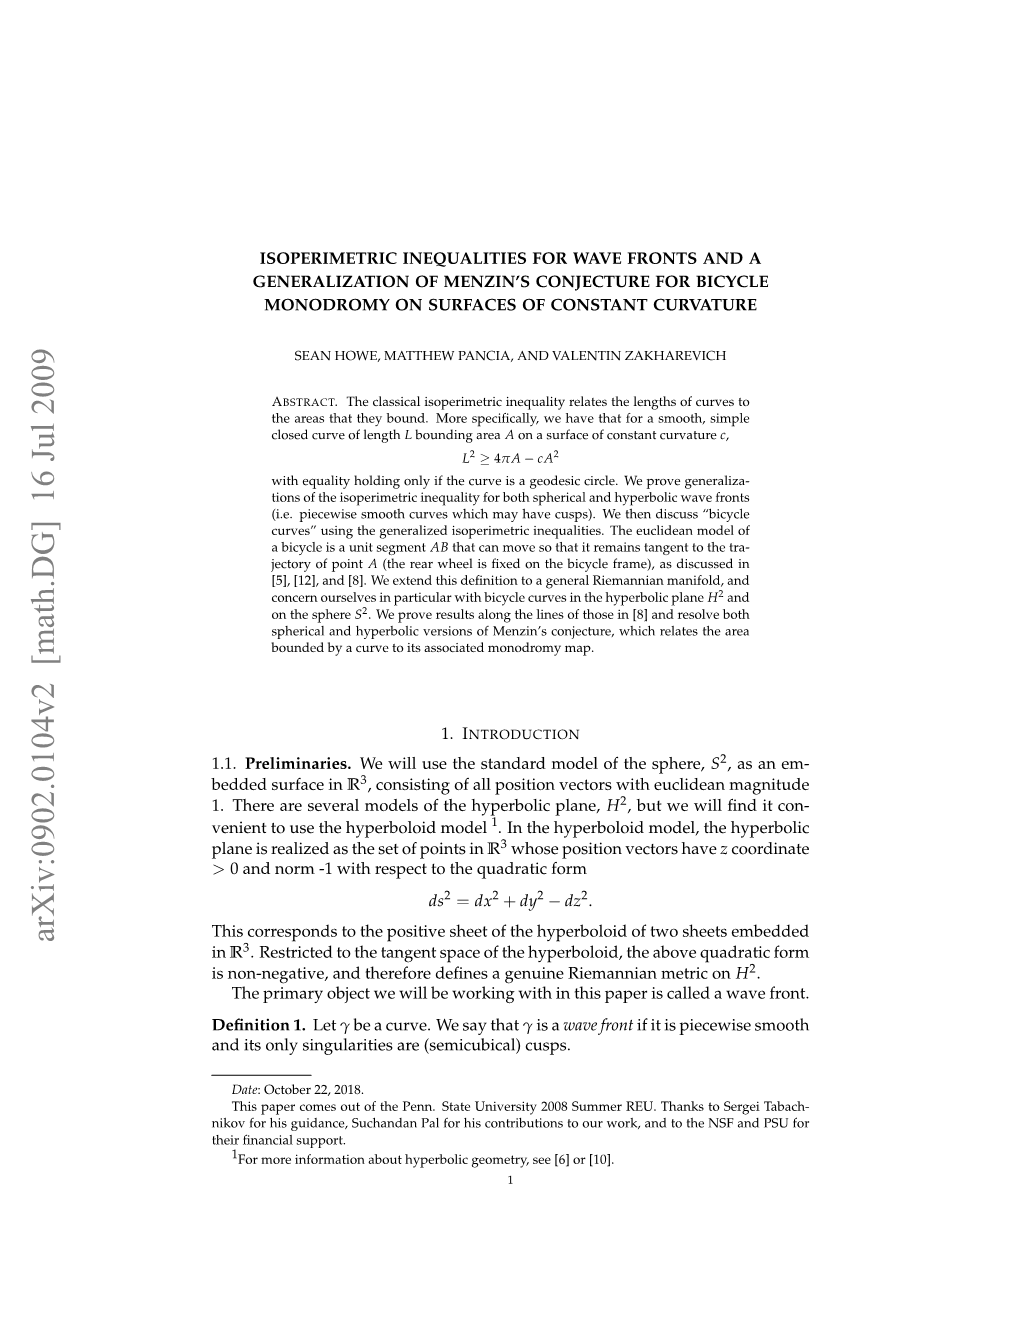 Isoperimetric Inequalities for Wave Fronts and a Generalization of Menzin’S Conjecture for Bicycle Monodromy on Surfaces of Constant Curvature